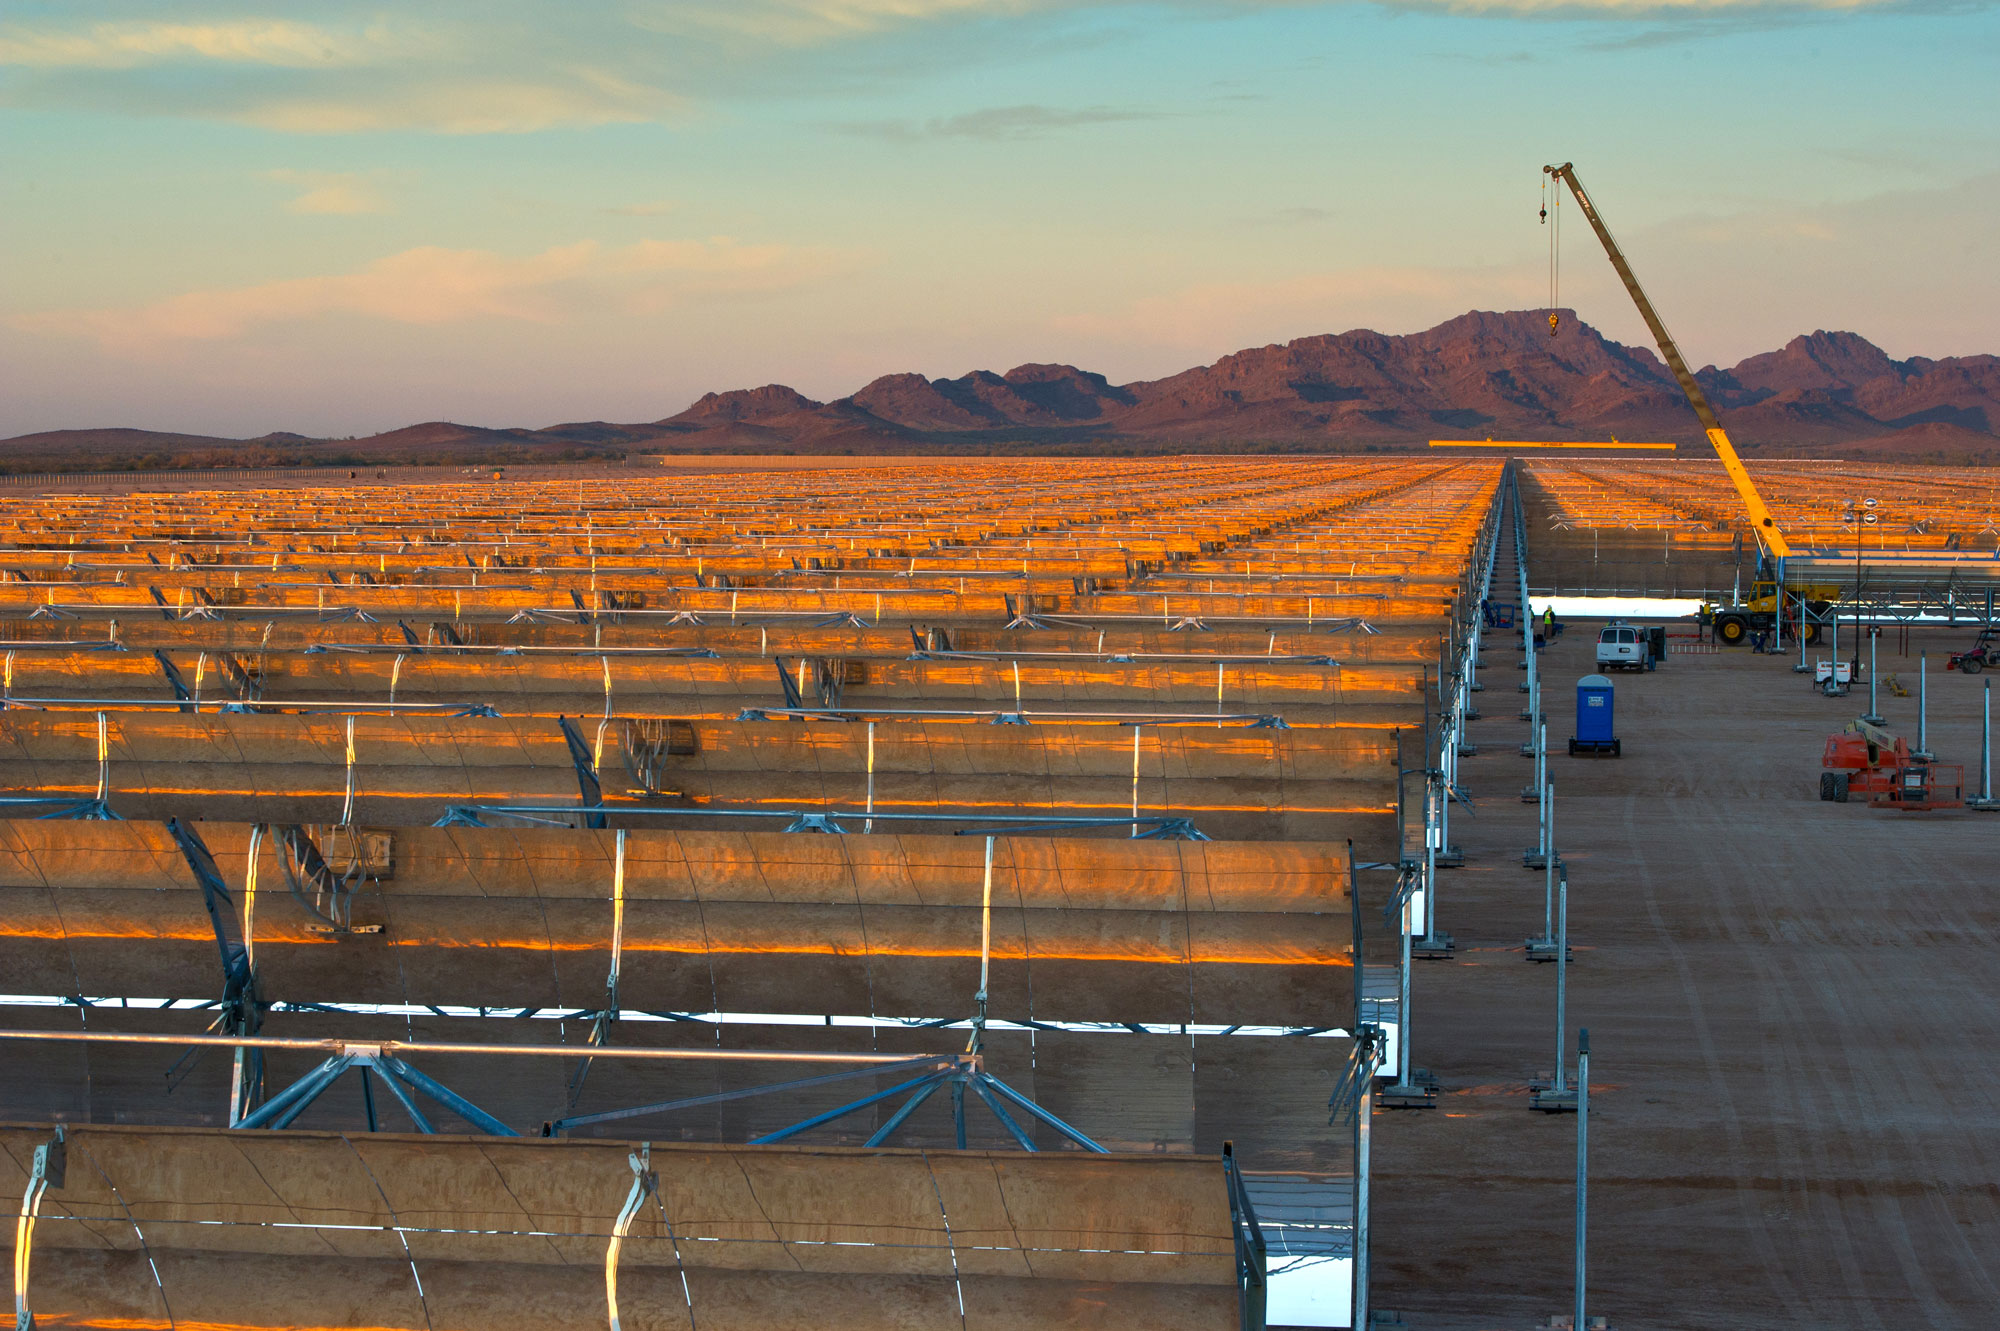 Photograph of a solar plant in Arizona. The plant is under construction, as indicated by a crane in the background. The plant is made up of many rows of parabolic mirrors.